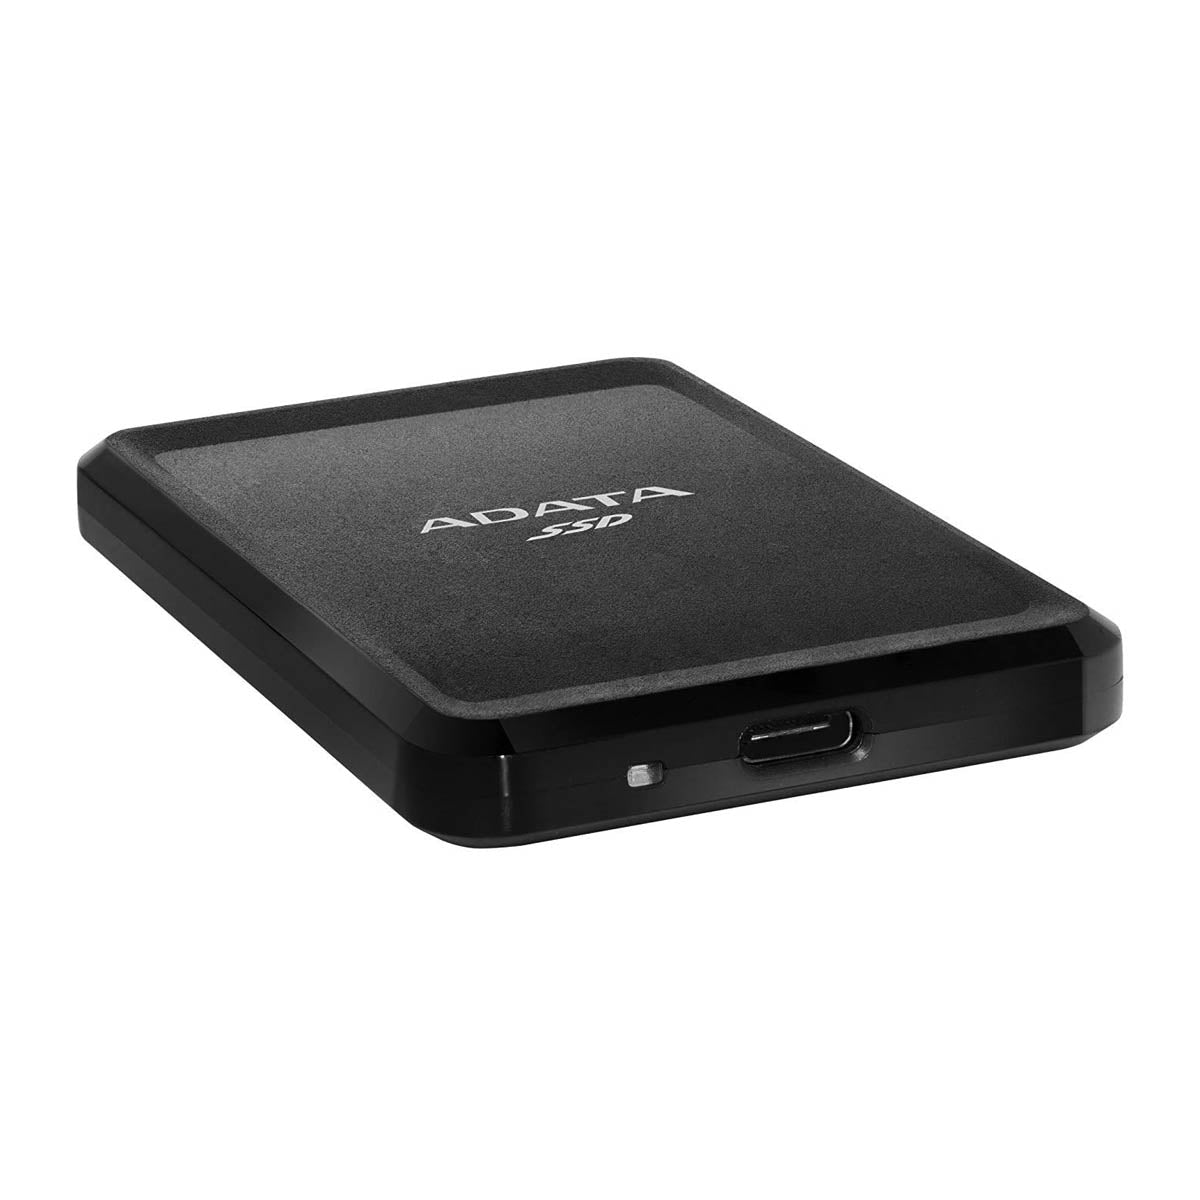 ADATA SC685 250GB USB-C External Solid State Drive with Shock Resistance